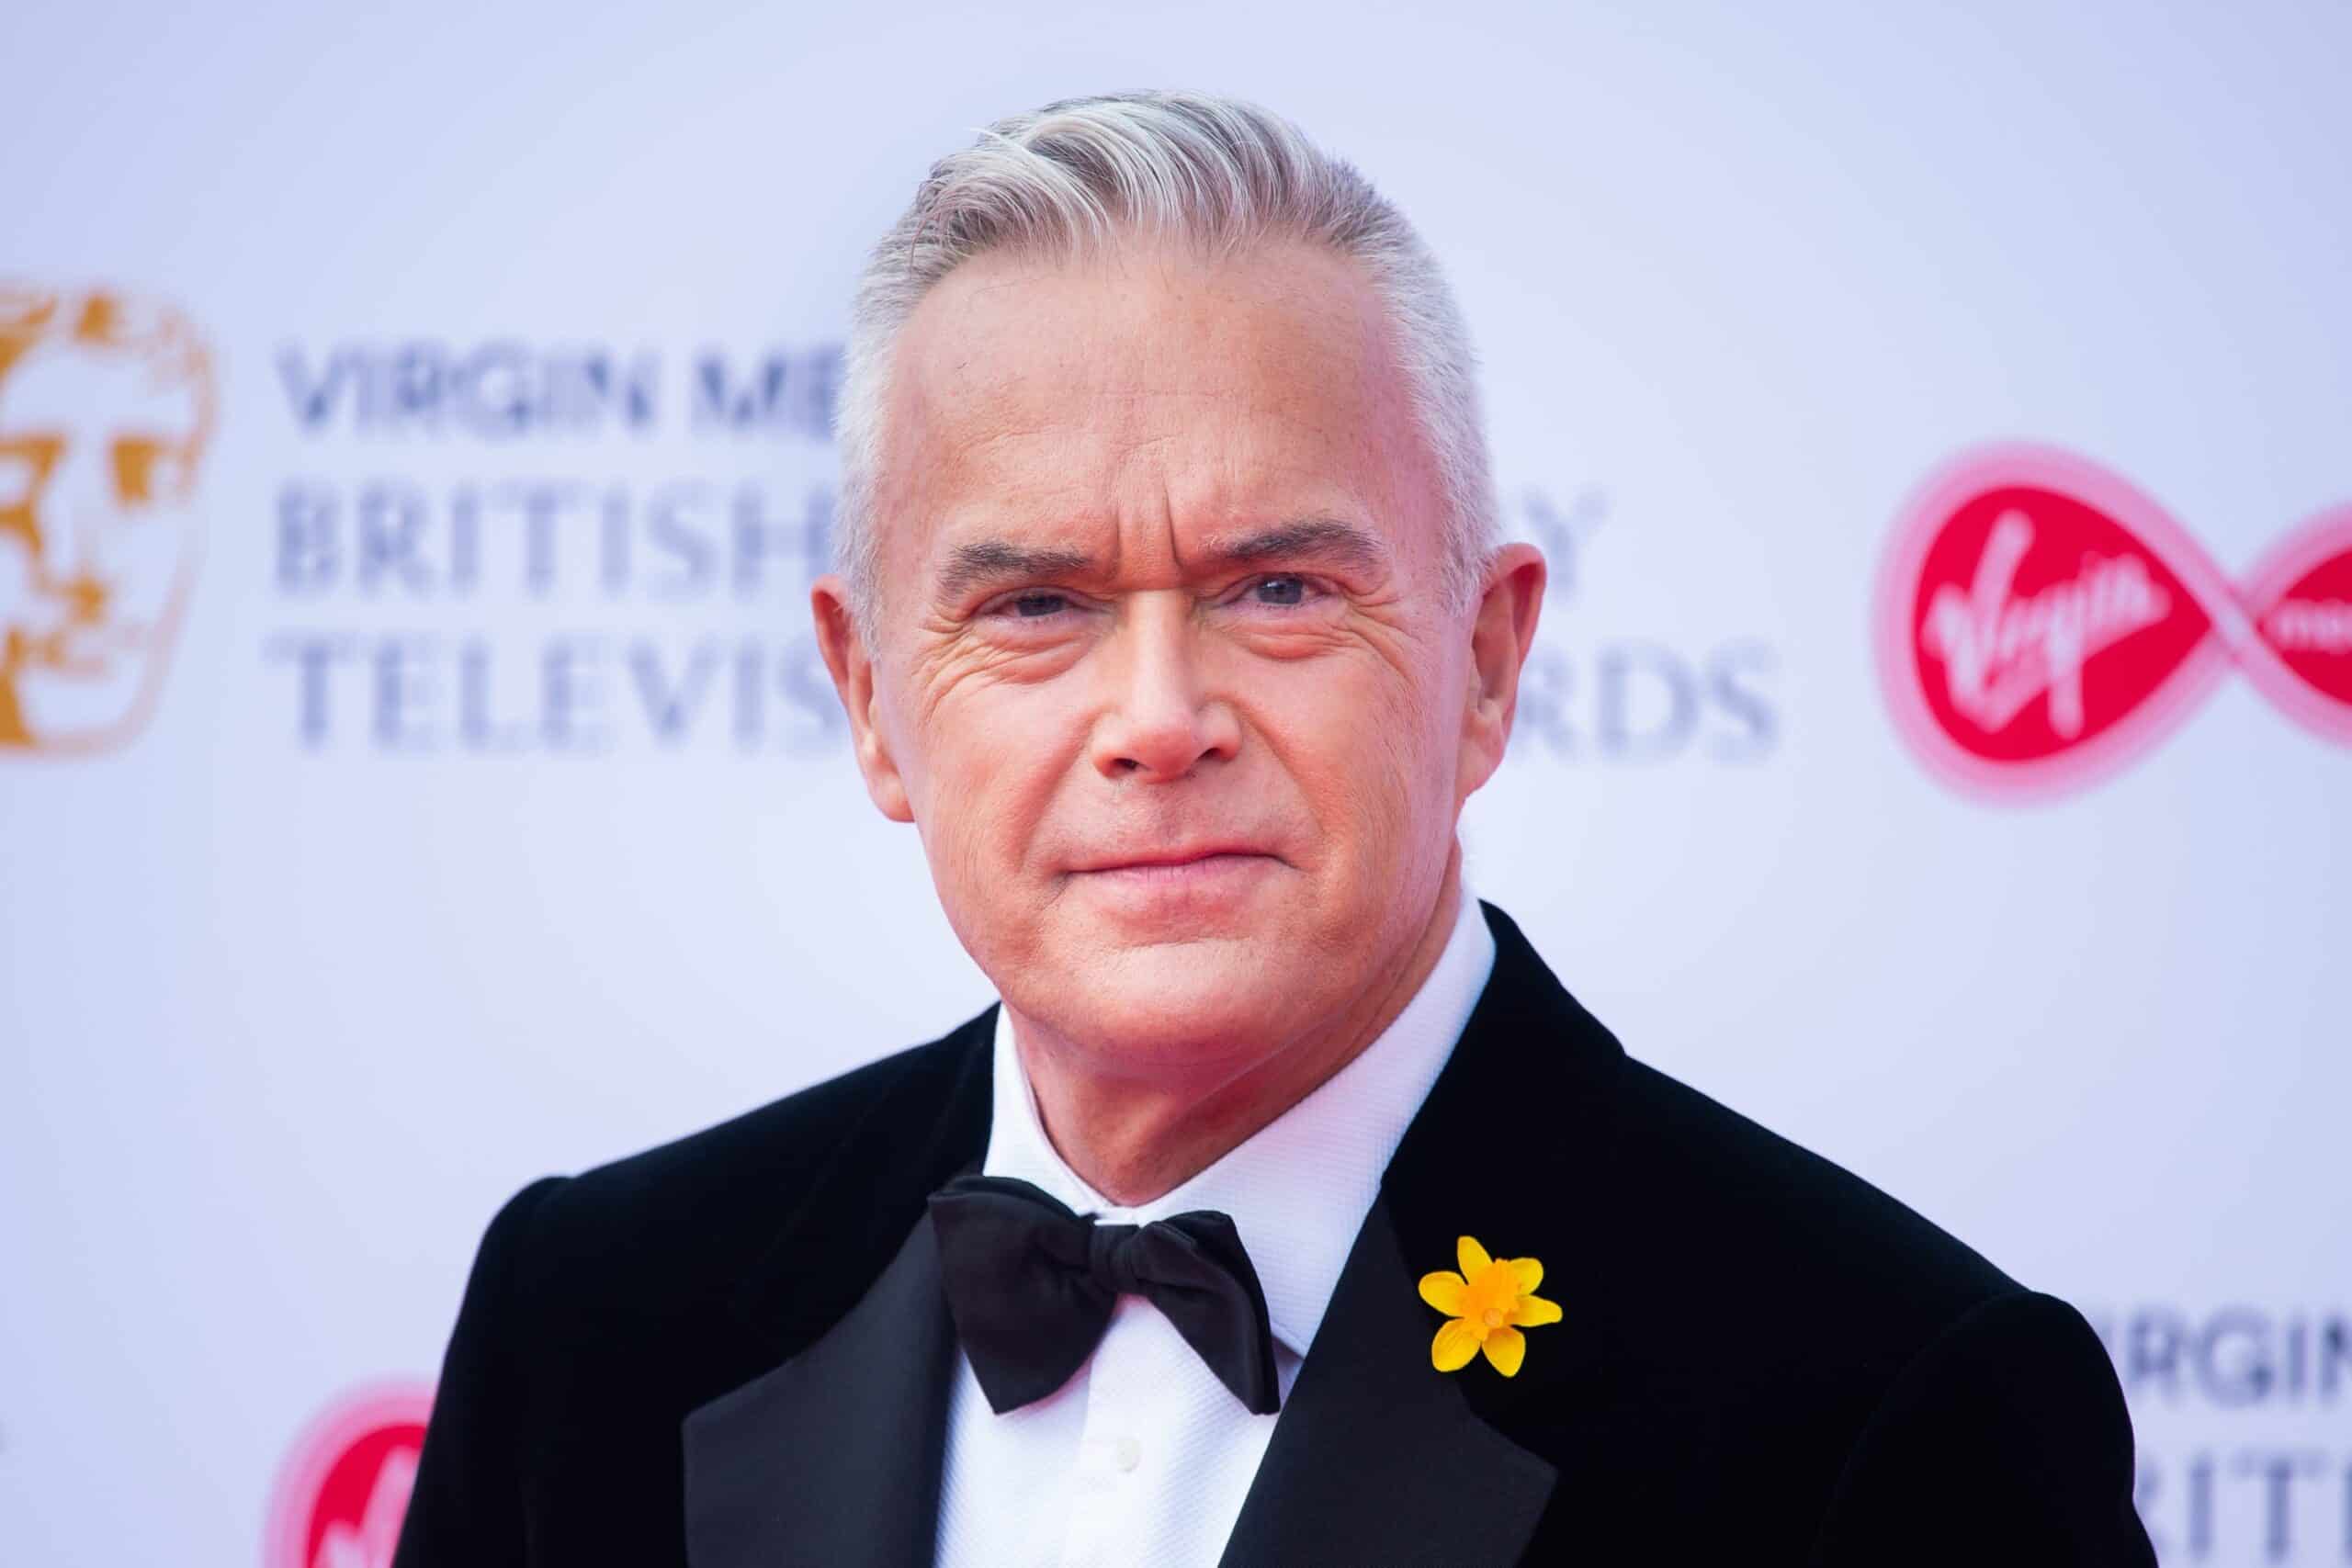 Huw Edwards’s wife confirms he is the BBC presenter accused of paying sexually explicit images